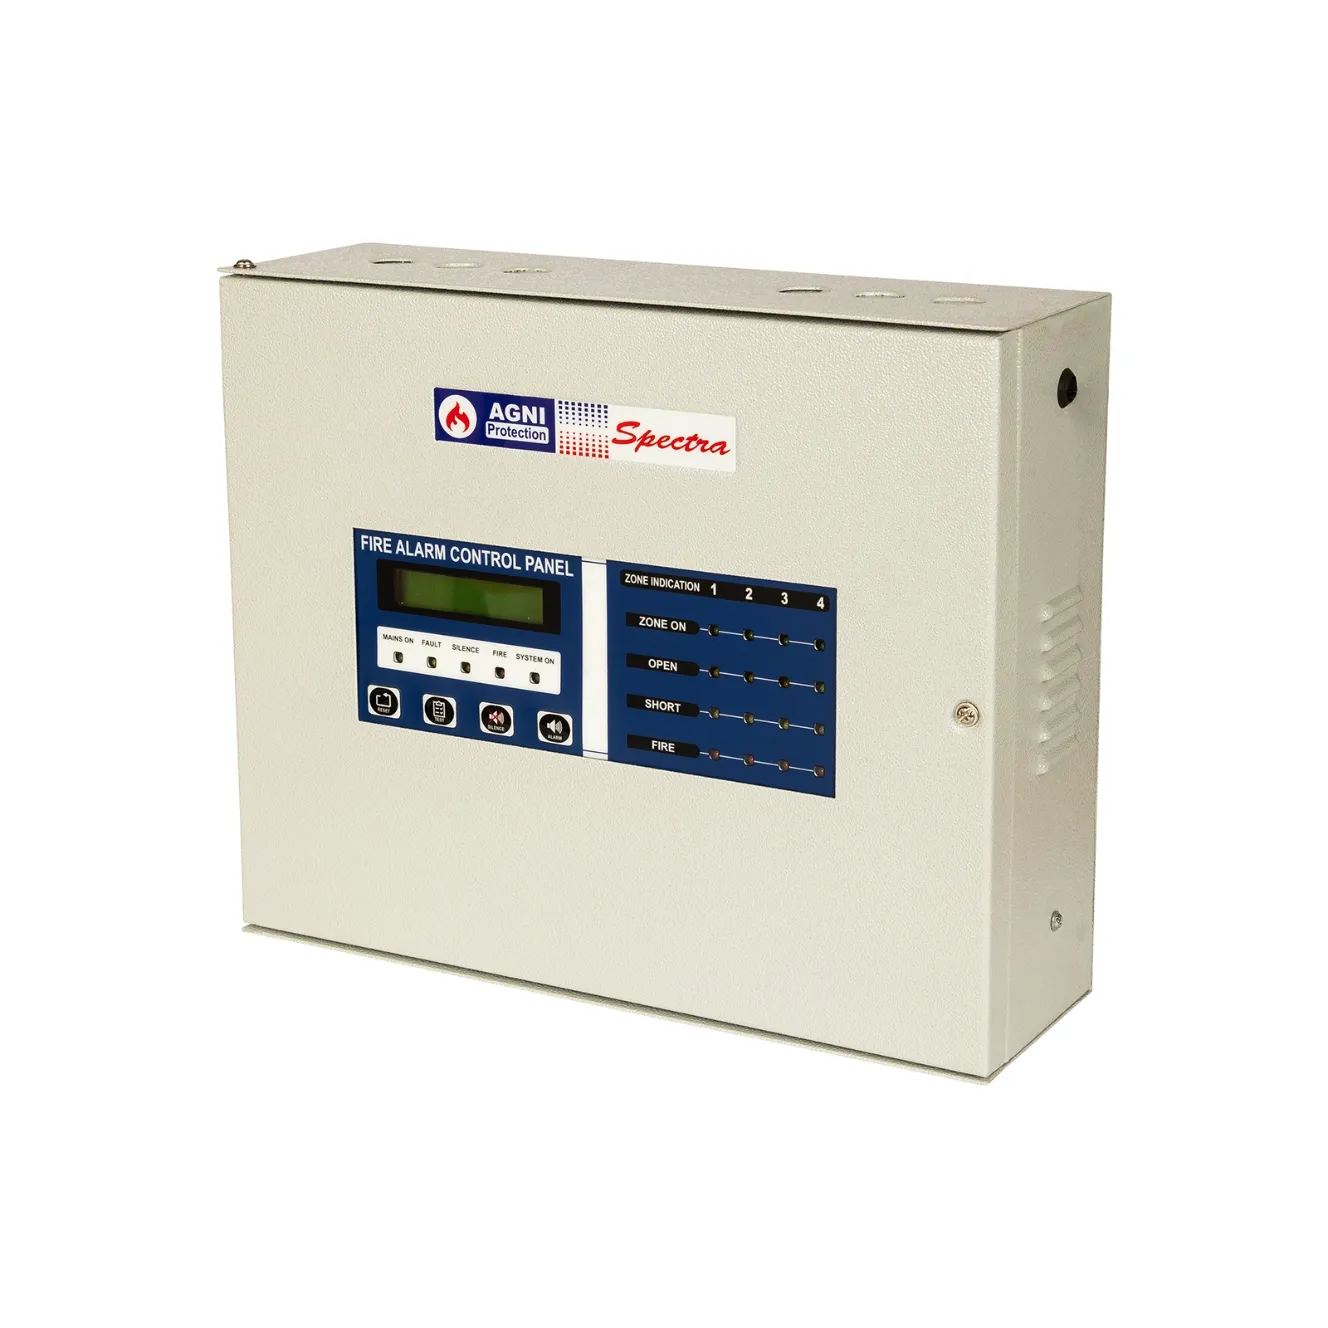 4 ZONE CONVENTIONAL FIRE ALARM PANEL